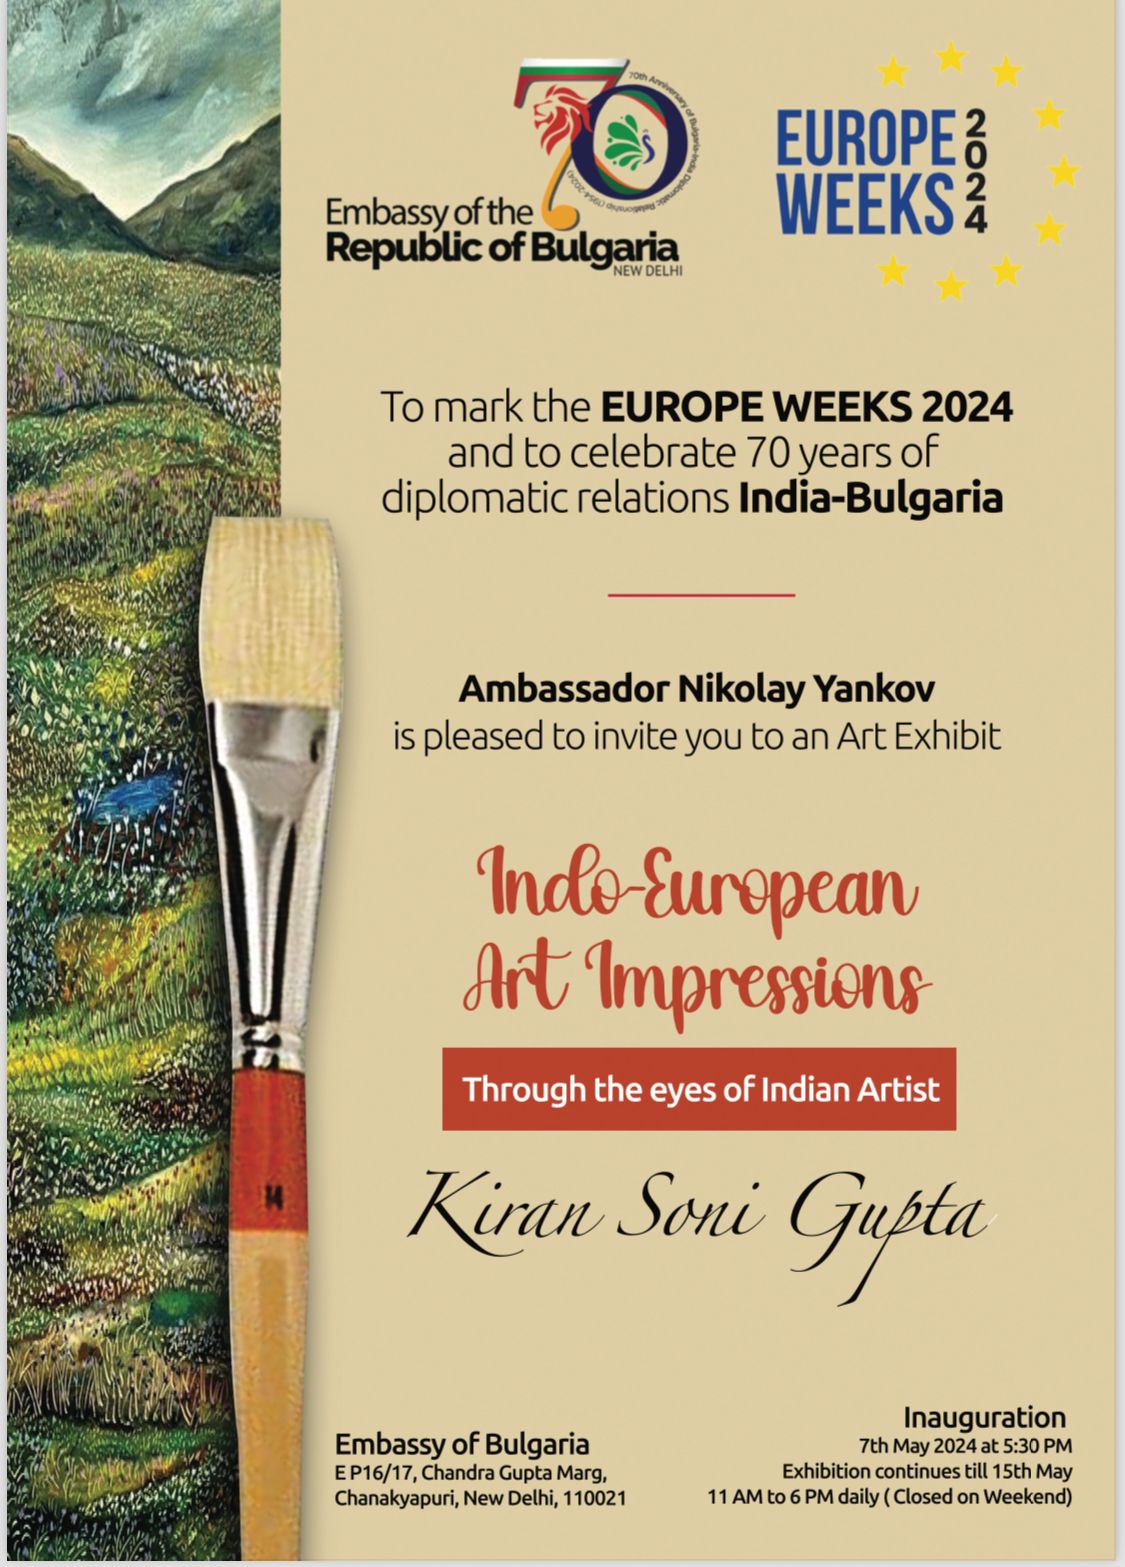 To mark the Europe Weeks 2024 and to celebrate 70 years of diplomatic ties of India and Bulgaria, an art exhibit